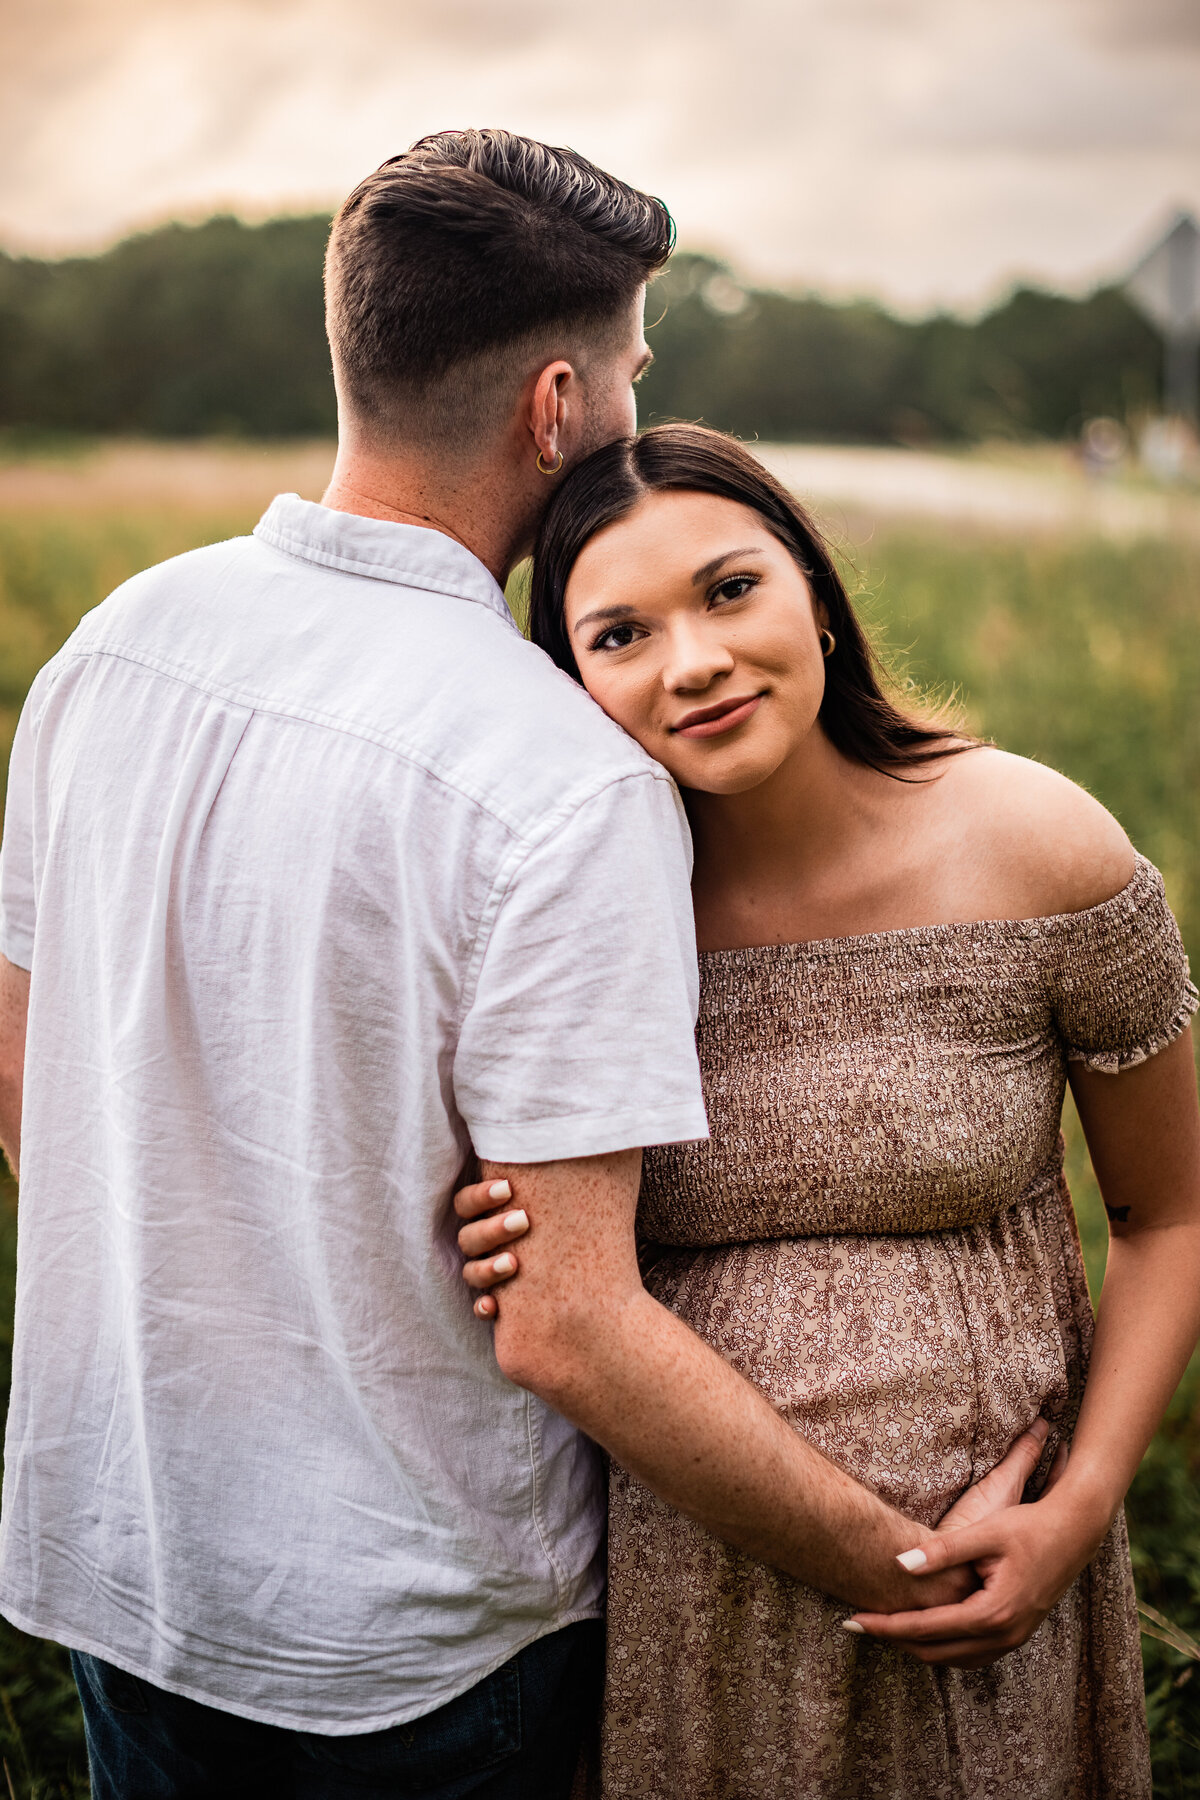 A mom to be leans her head on her boyfriend's shoulder as he holds her belly bump.